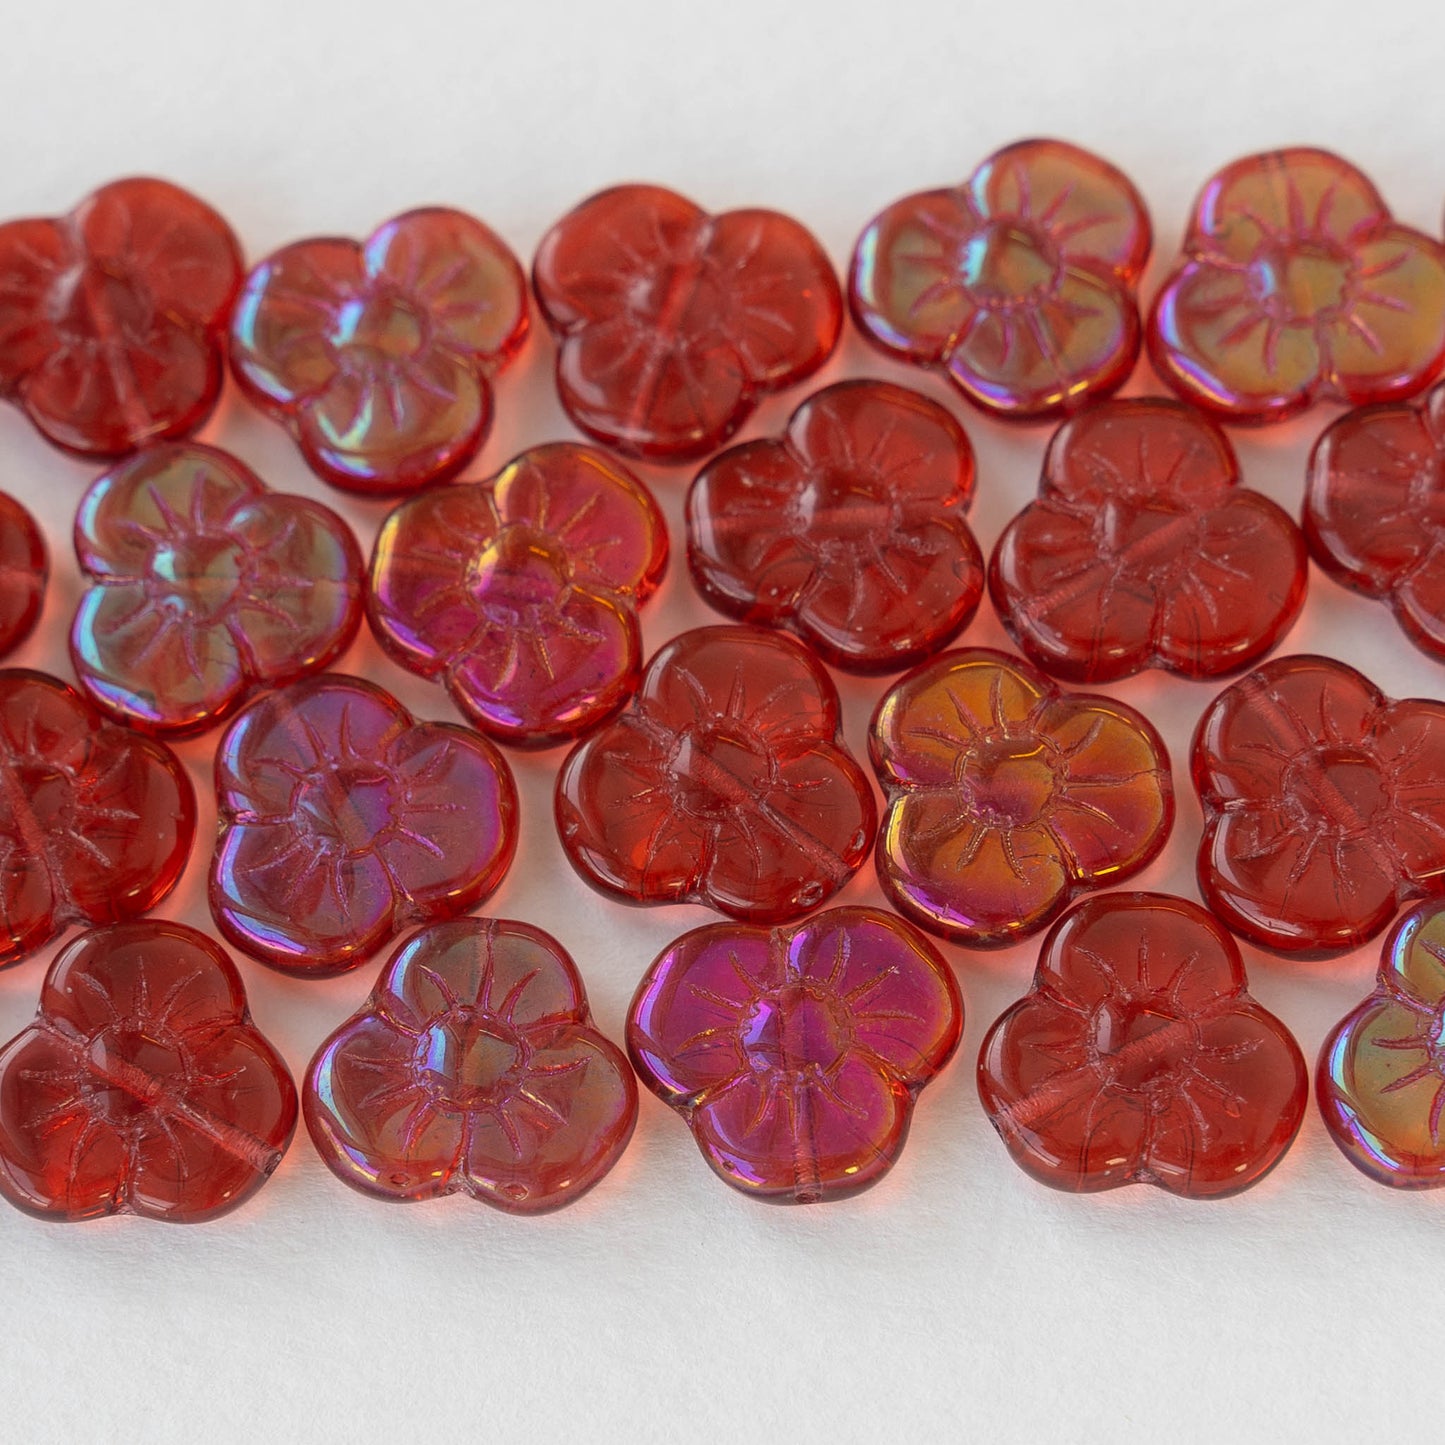 13mm Pansy Flower Beads - Red - 10 Beads